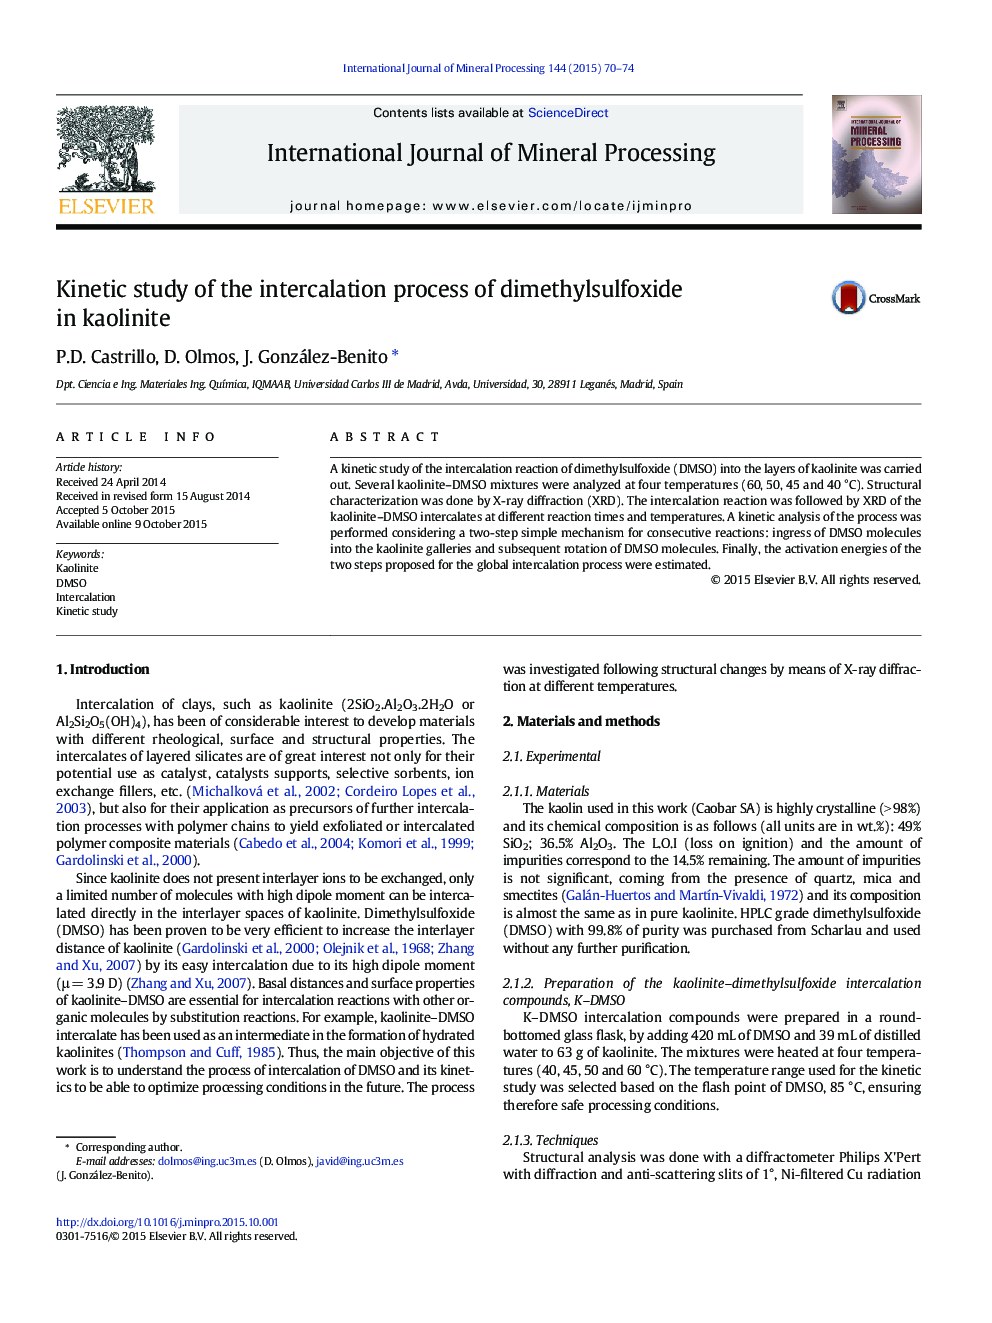 Kinetic study of the intercalation process of dimethylsulfoxide in kaolinite